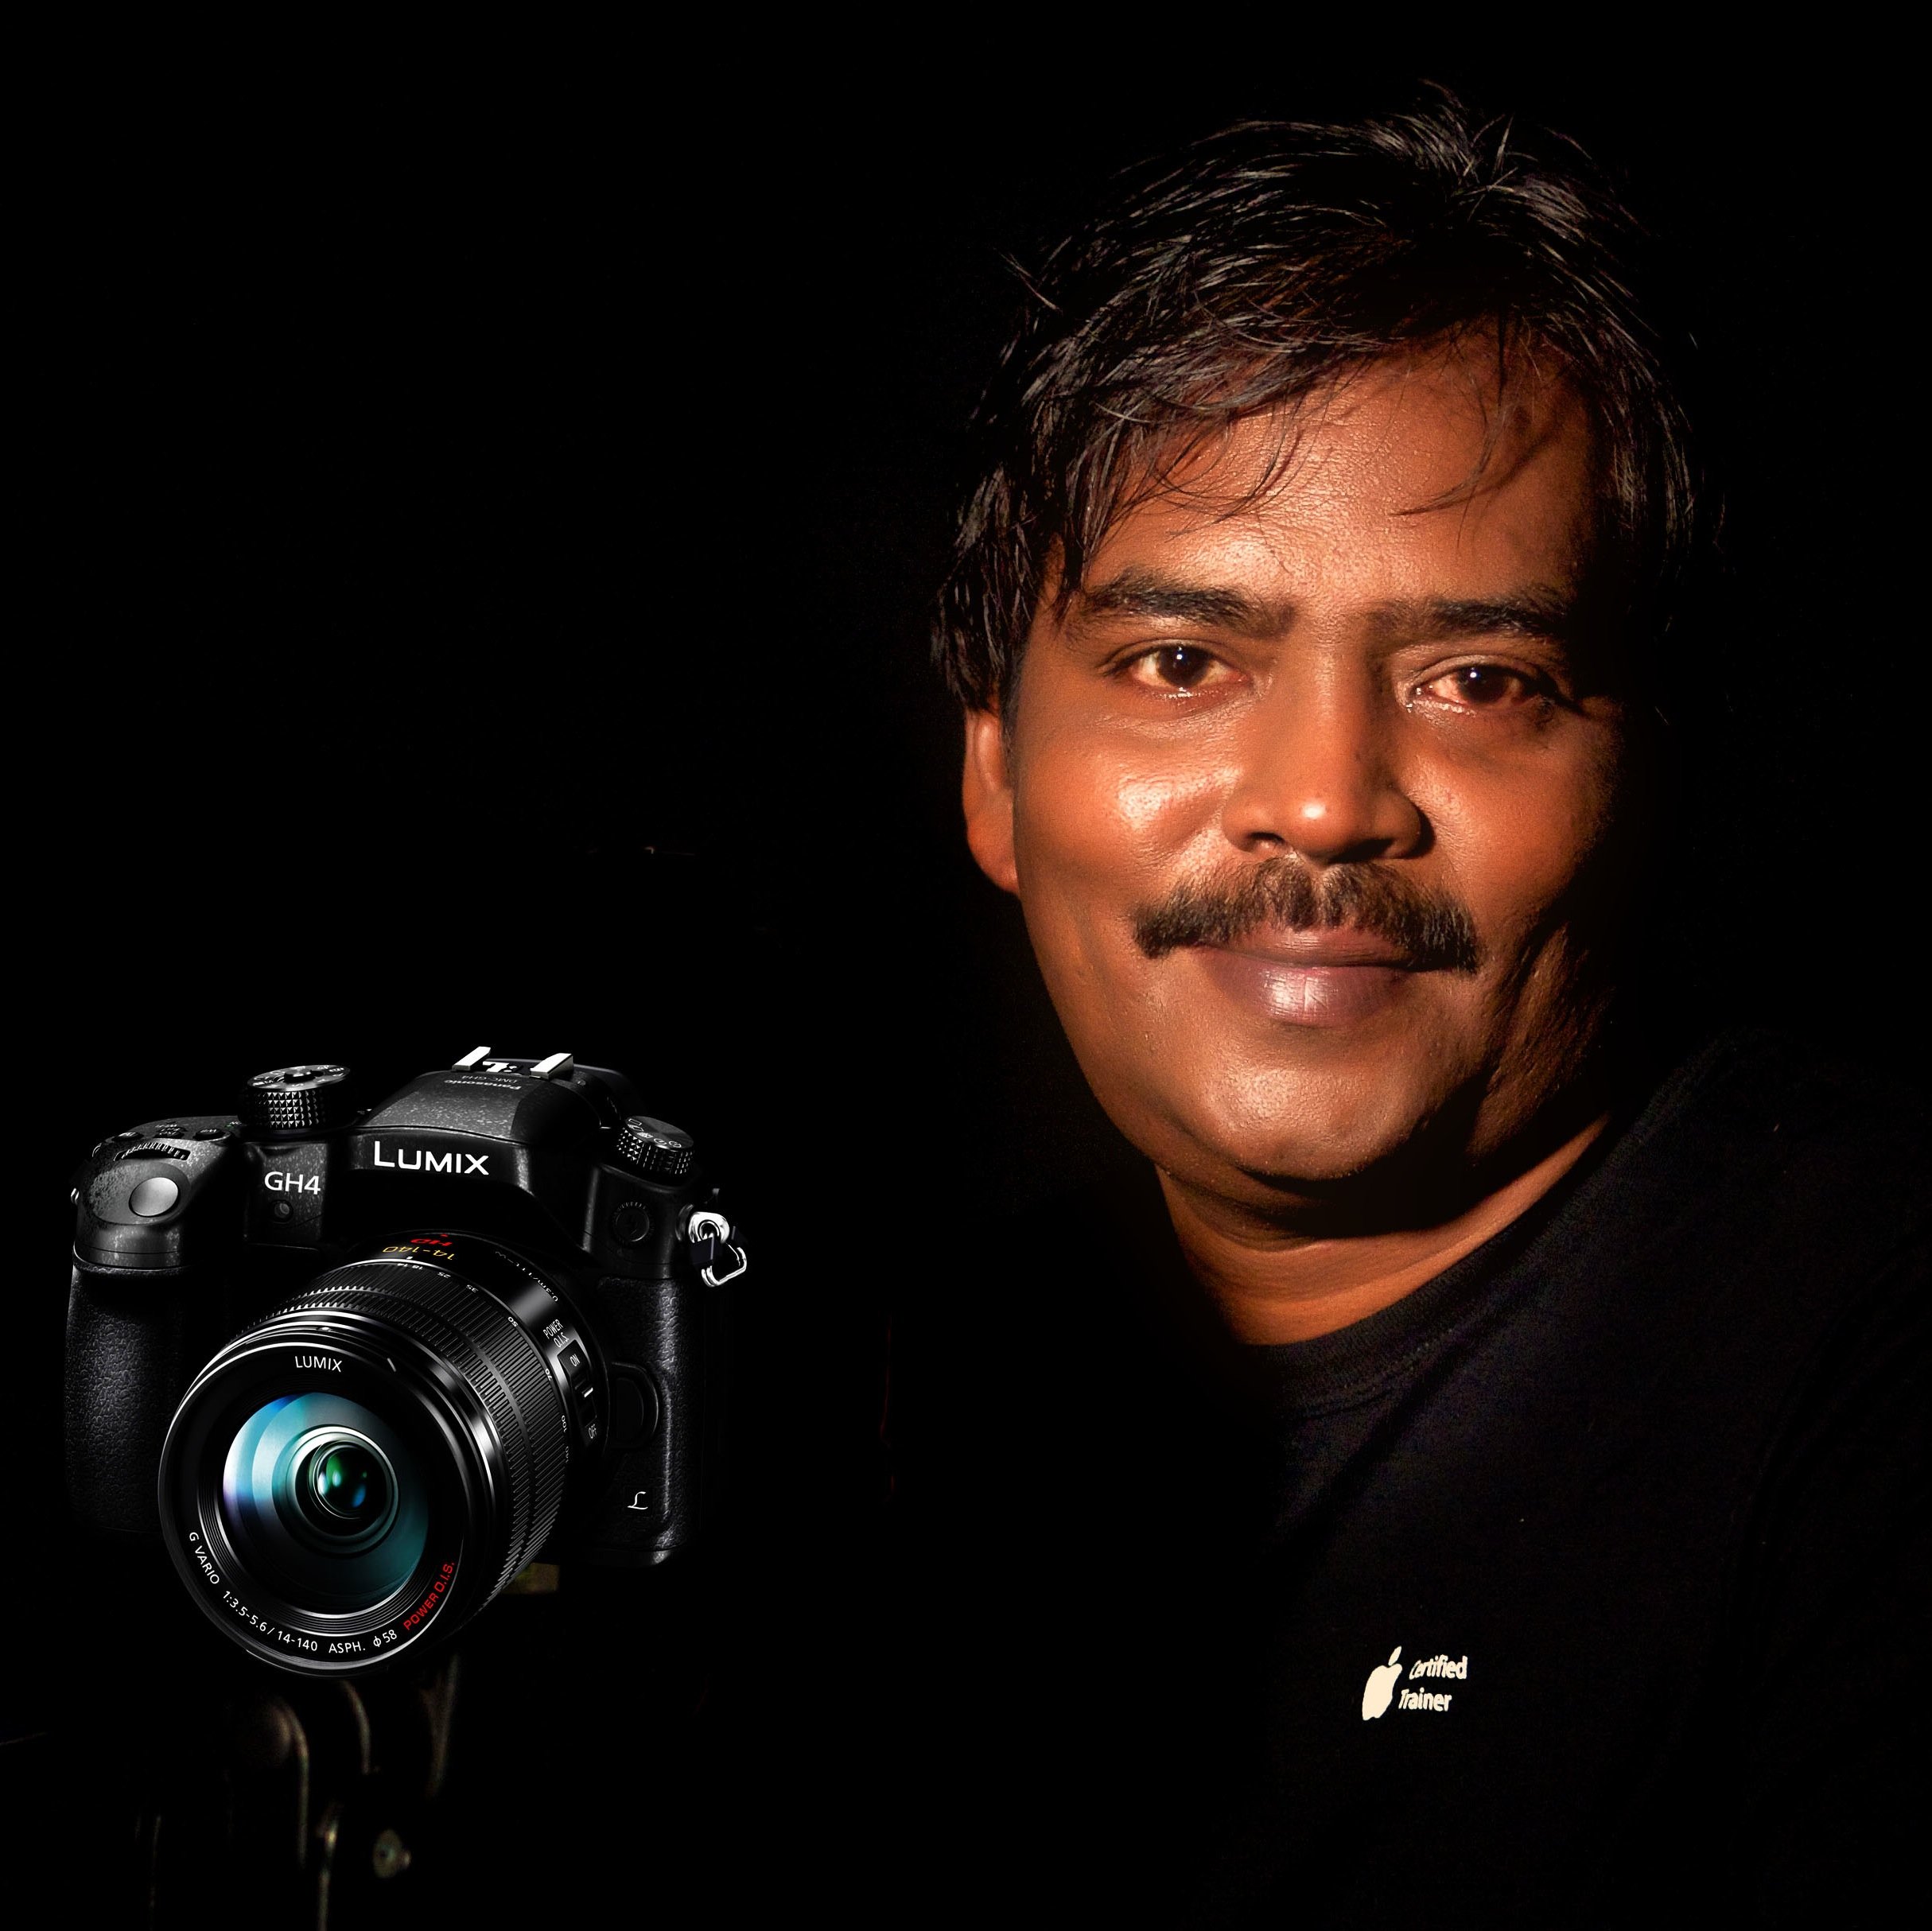 Musician, Pro Photographer, India's first Apple & Steinberg Certified Trainer and Director at Audio Media Education.